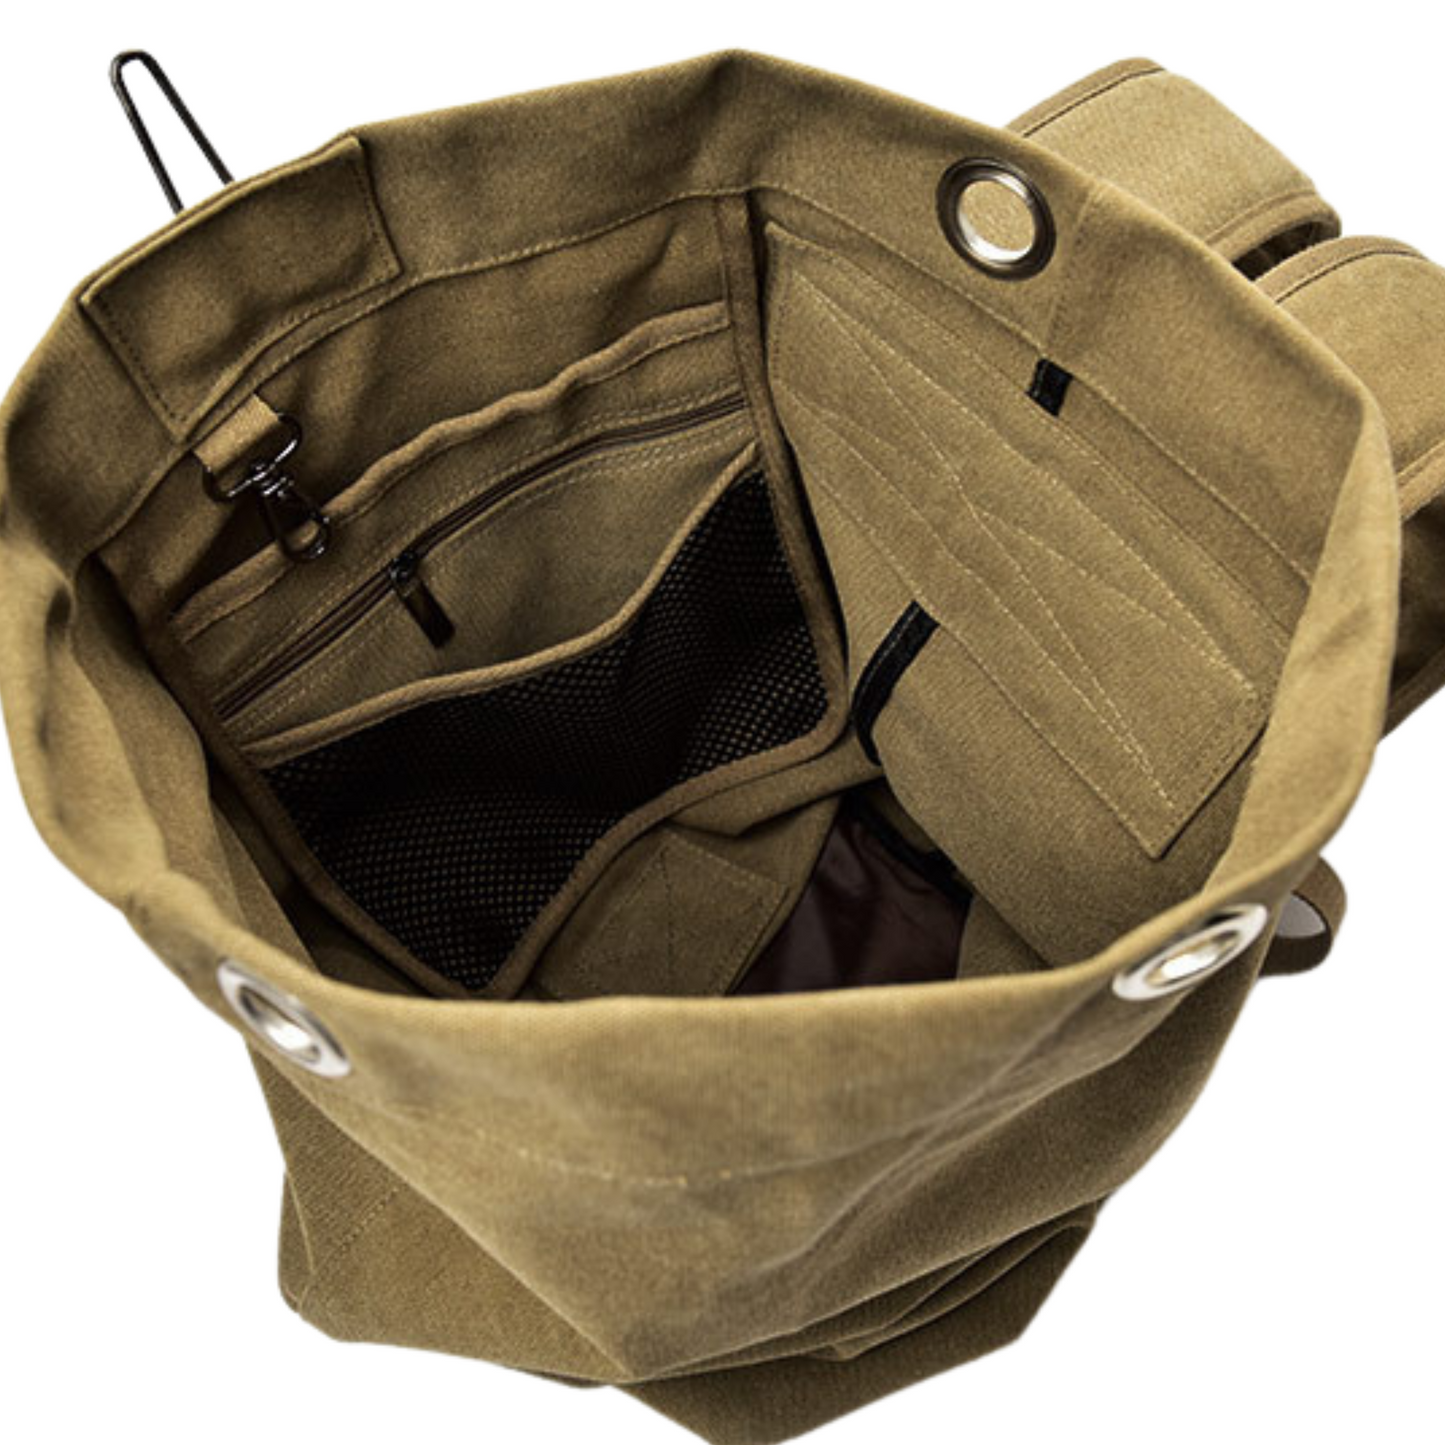 Extra Large Army Style Vintage Canvas Duffel Bag and Carry Backpack